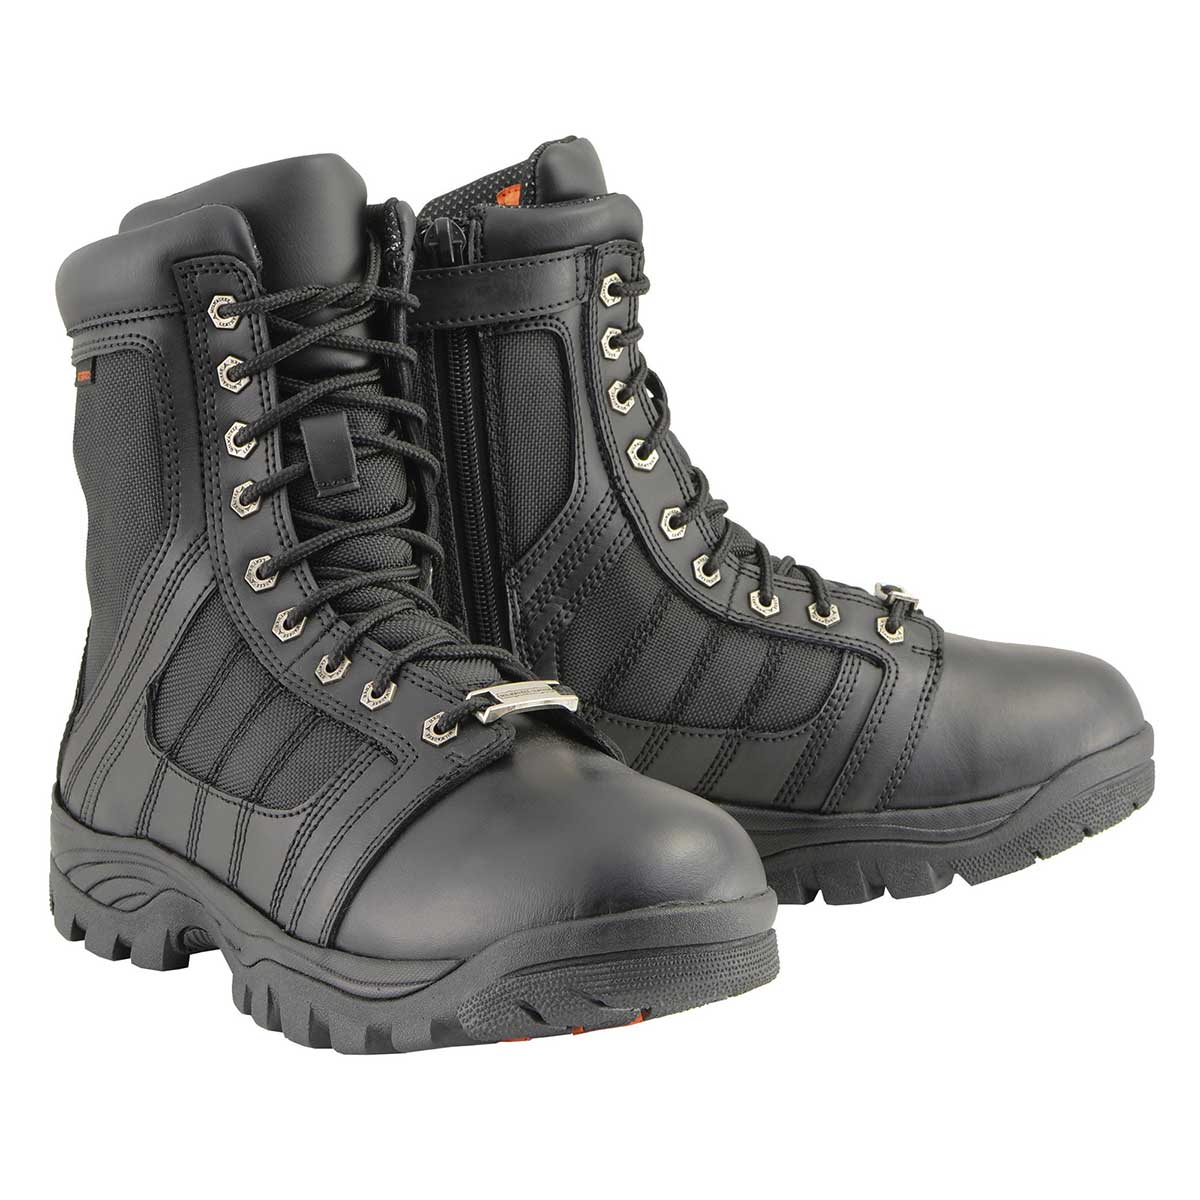 Milwaukee Leather MBM9130WP Men’s Black Lace-Up Waterproof Swat Style-Tactical Biker Motorcycle Boots